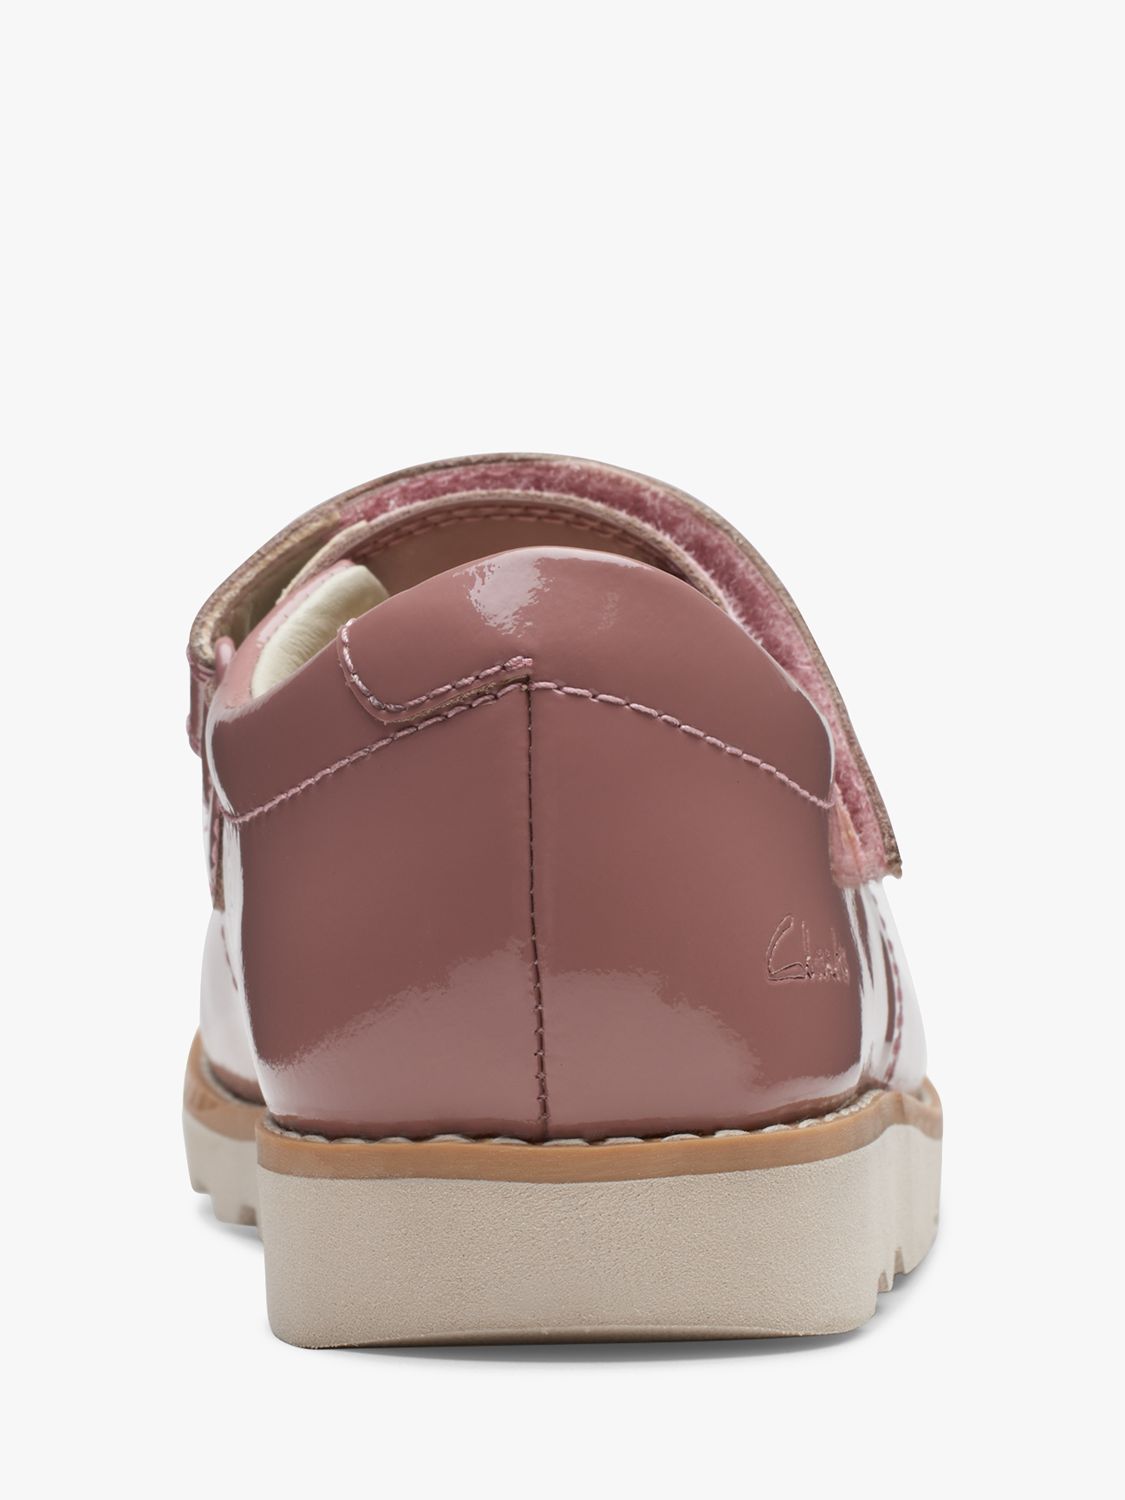 Clarks Kids' Crown Jane Leather Shoes, Dusty Pink, 4F Jnr